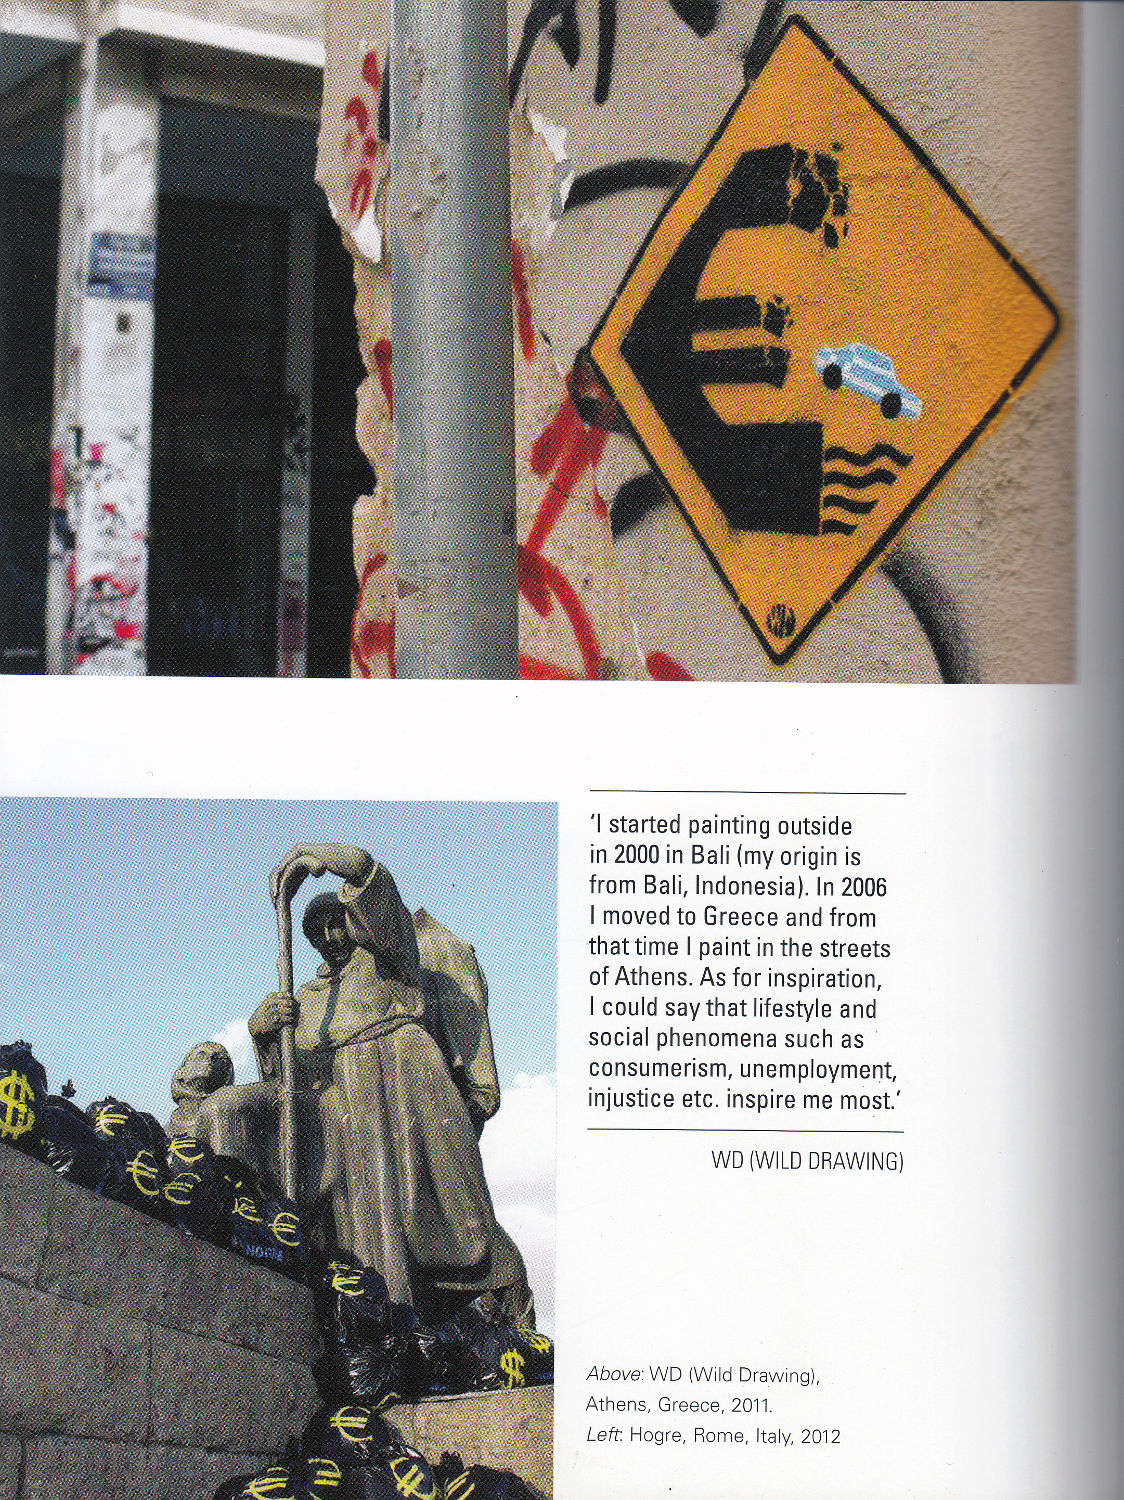 WD is featured in the book Planet Banksy by KET, Michael O'Mara Books LTD, London 2014